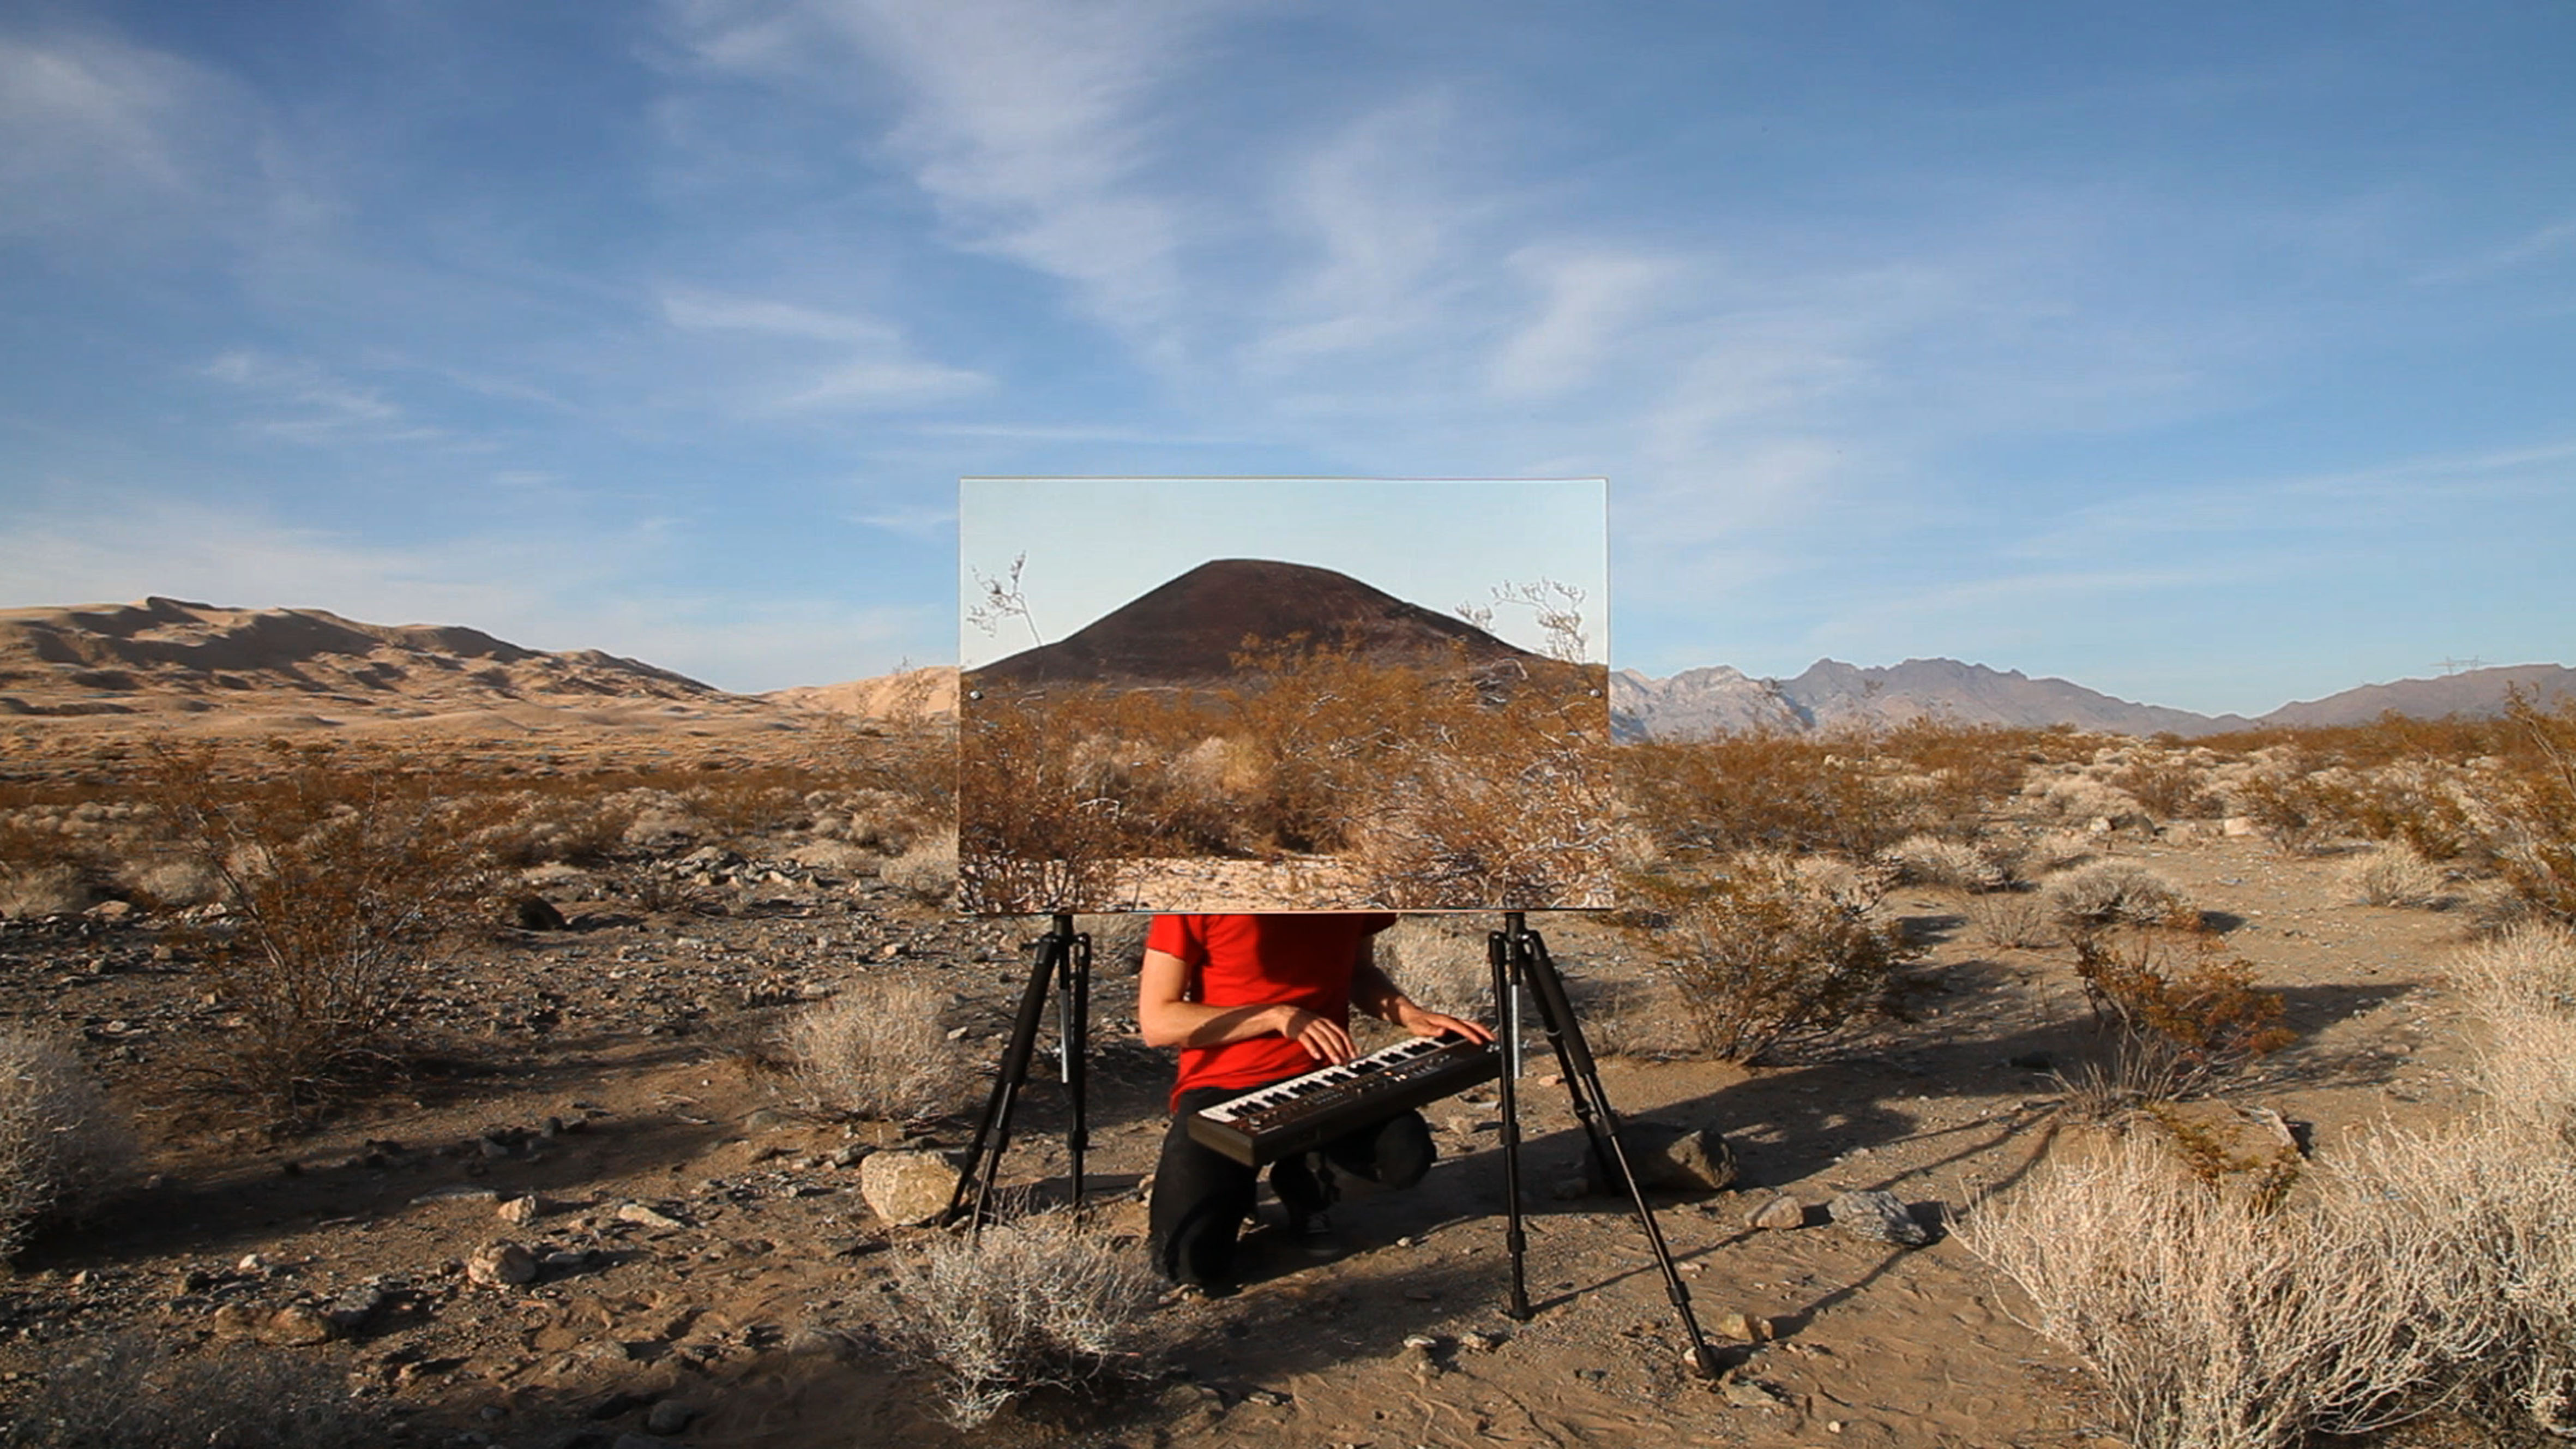 Richard T. Walker, let this be us, 2012, 8. keys dome valley